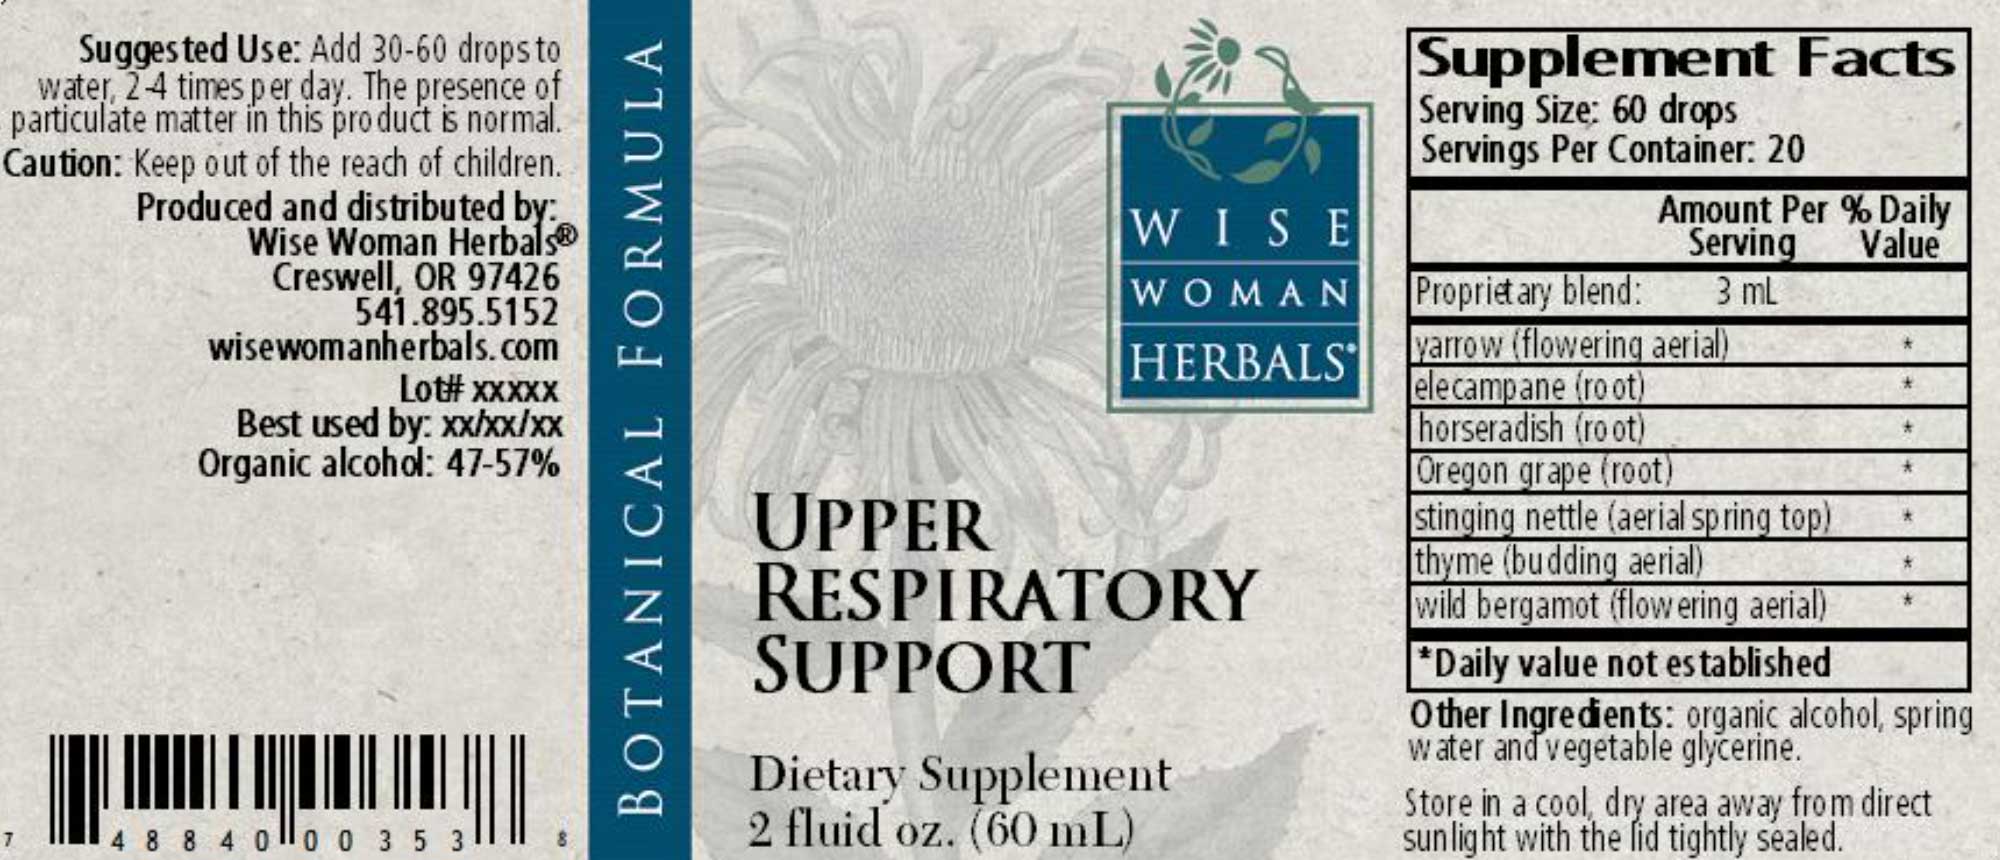 Wise Woman Herbals Upper Respiratory Support Label